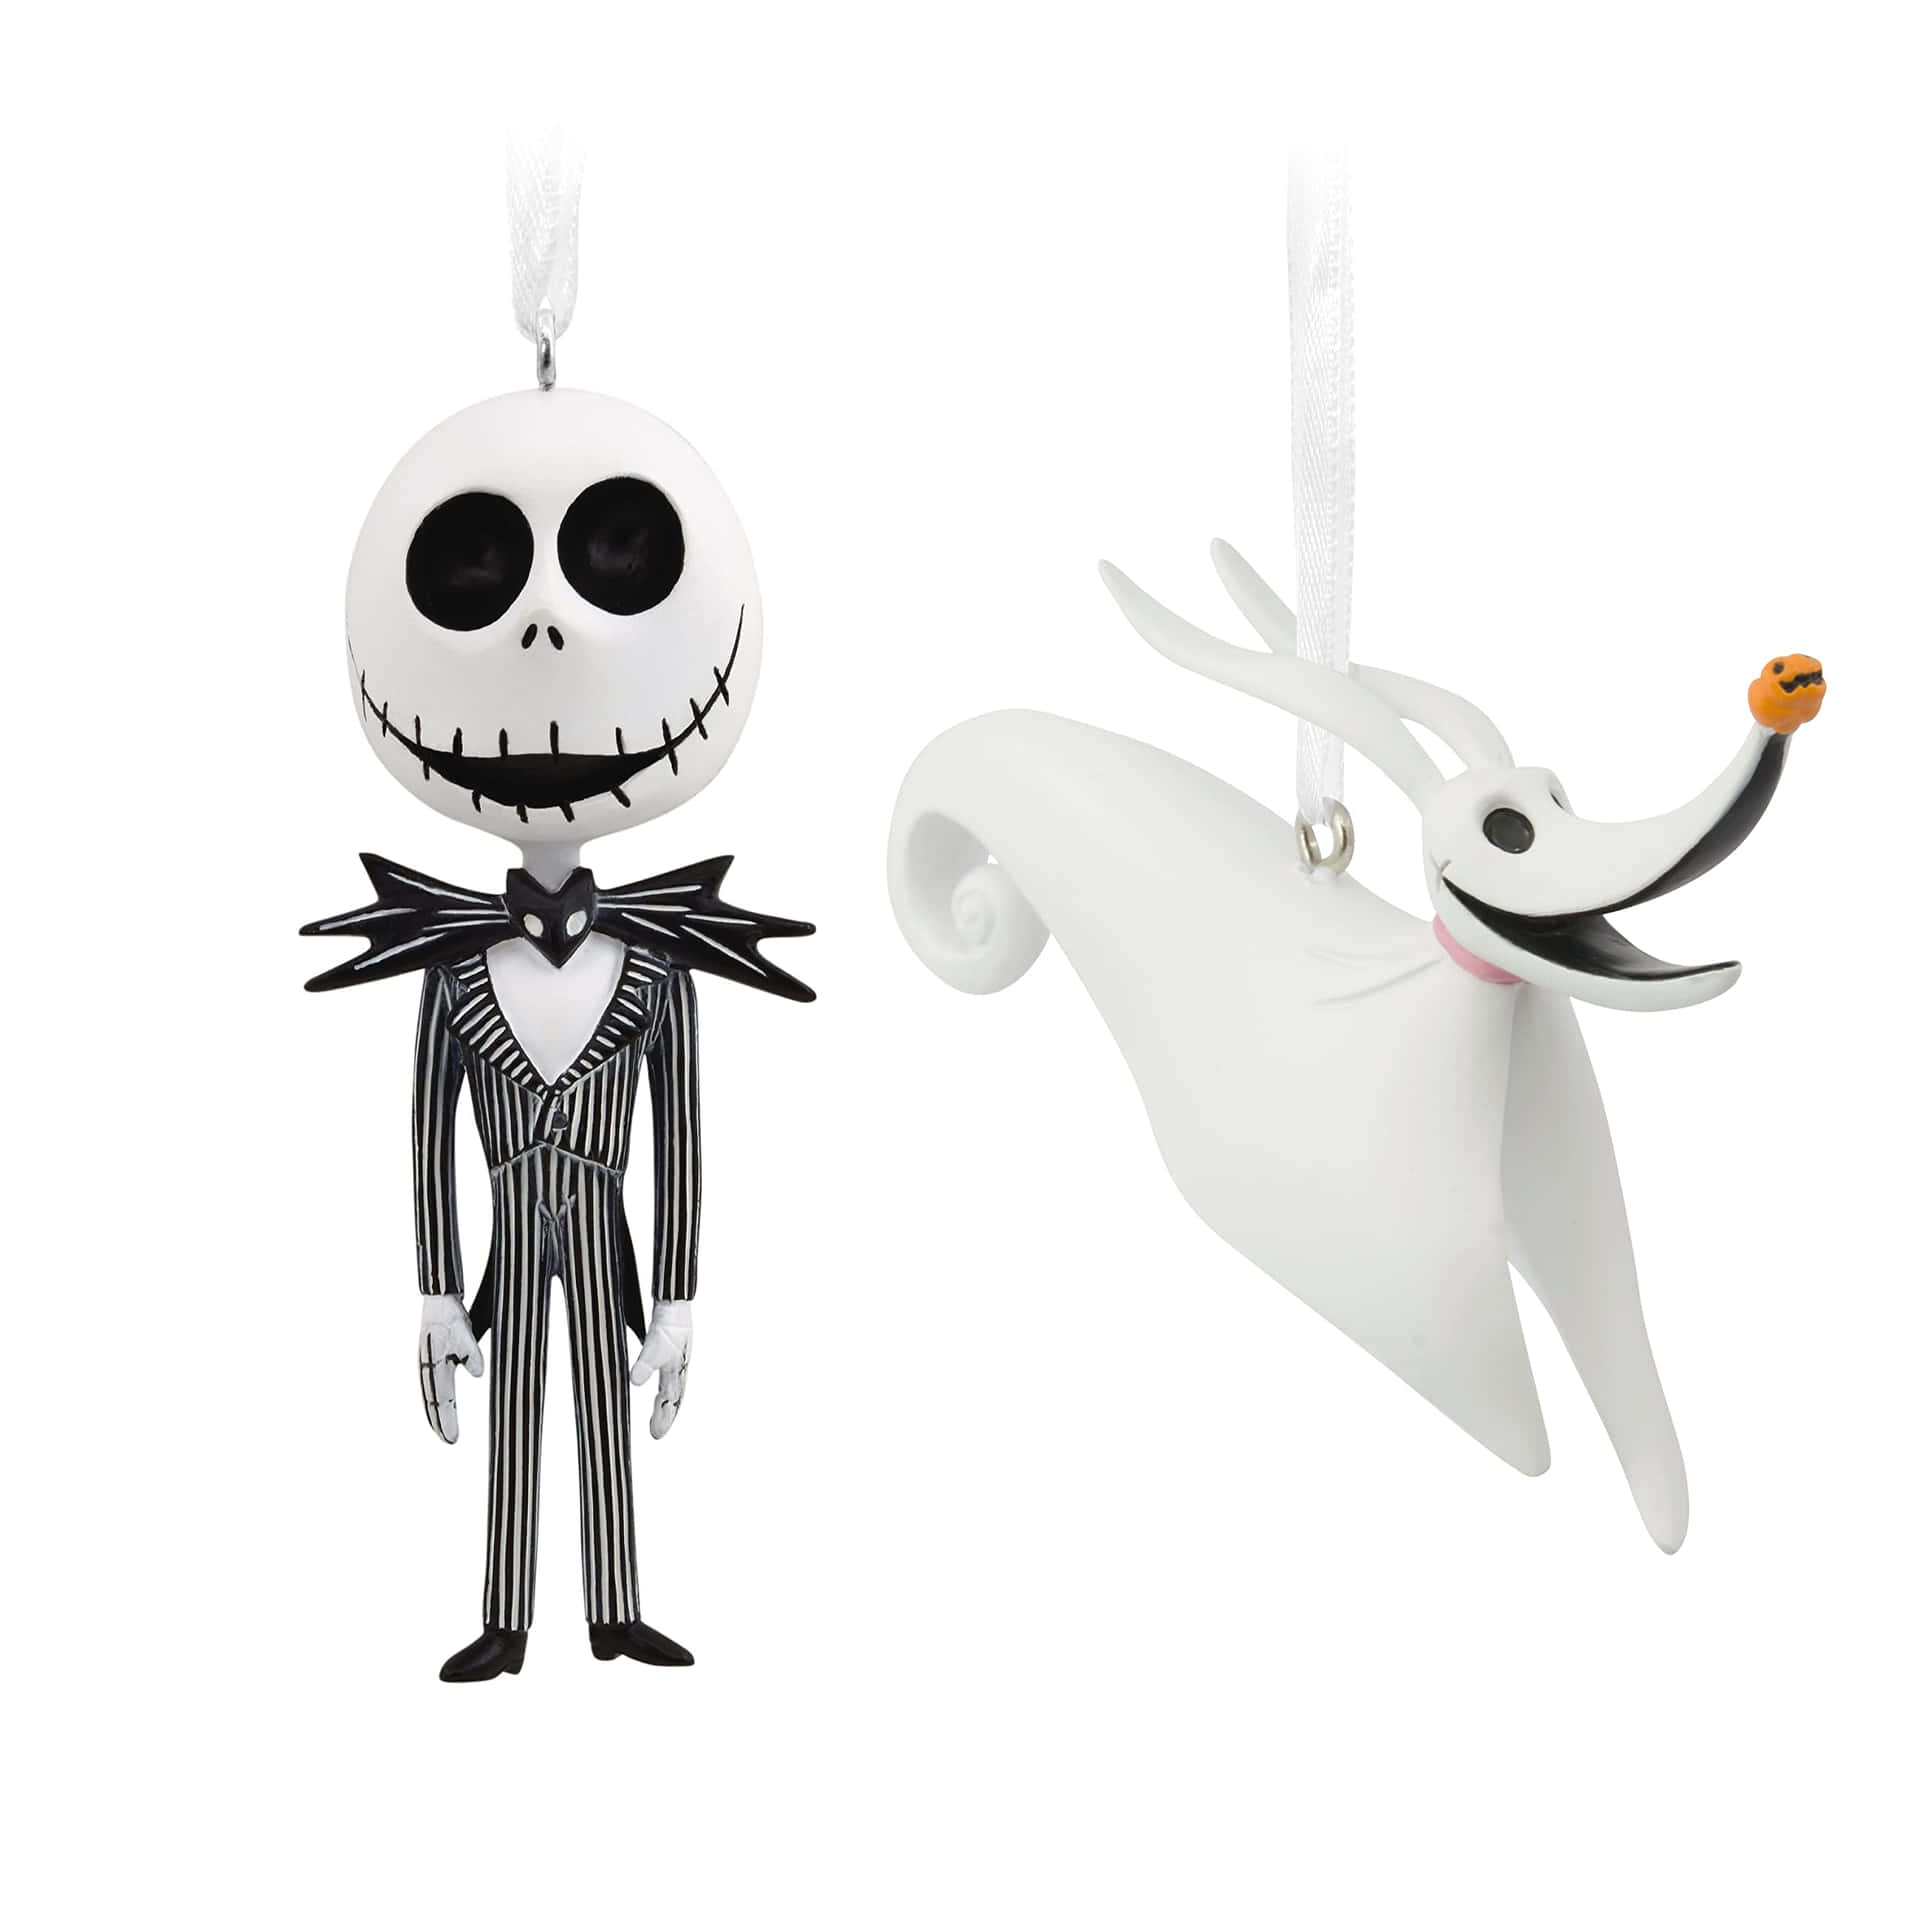 Get in the spirit of the holidays with this festive Jack Skellington image!